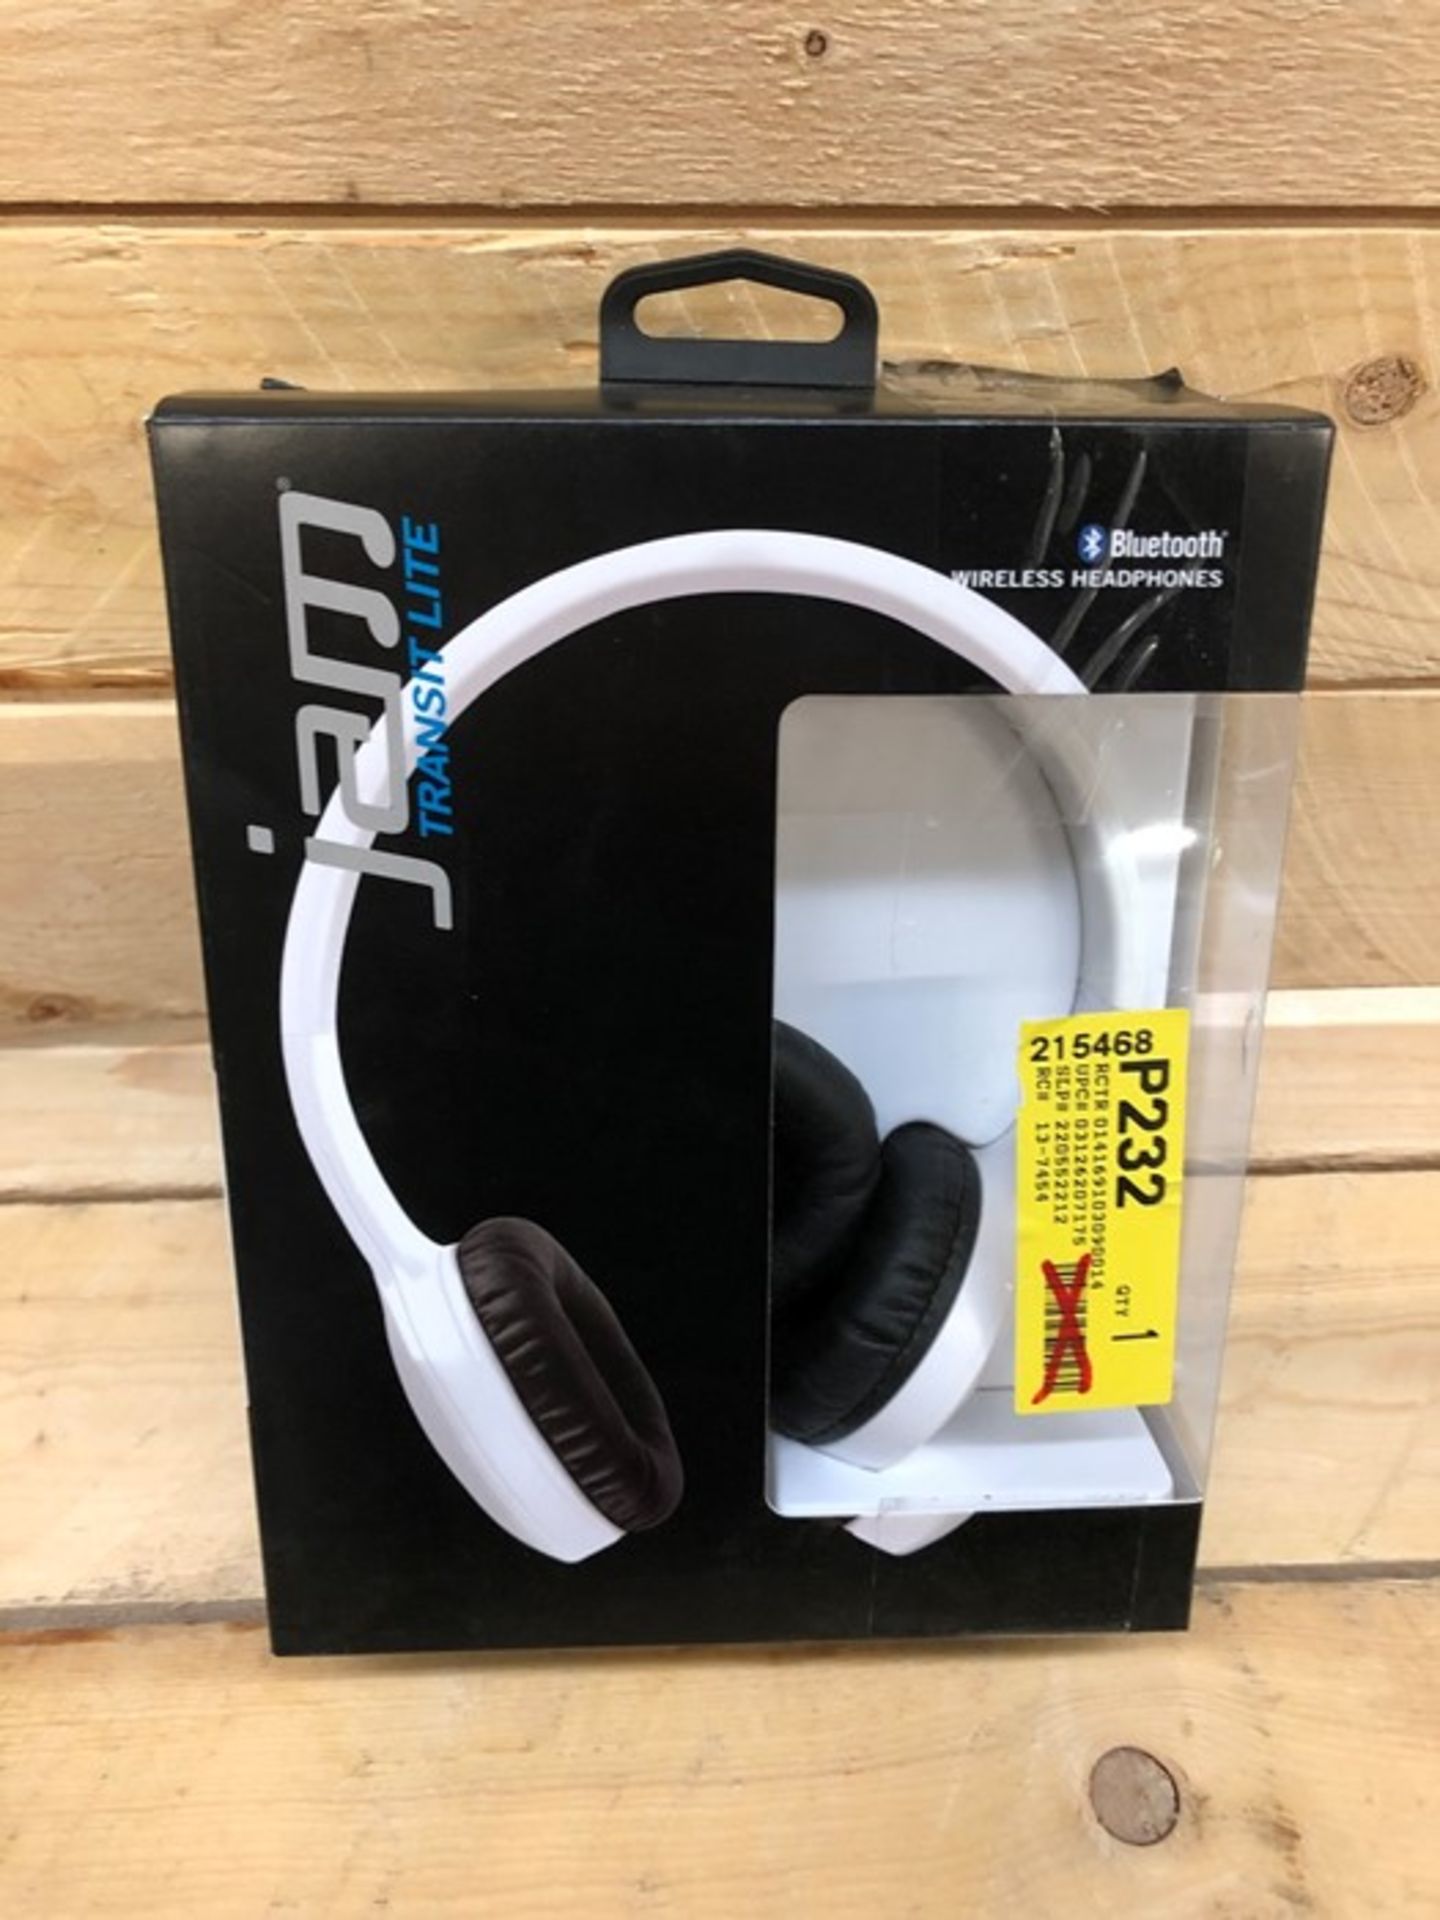 1 BOXED JAM TRANSIT LITE BLUETOOTH WIRELESS HEADPHONES IN WHITE / RRP £39.35 / BL 5468 (VIEWING